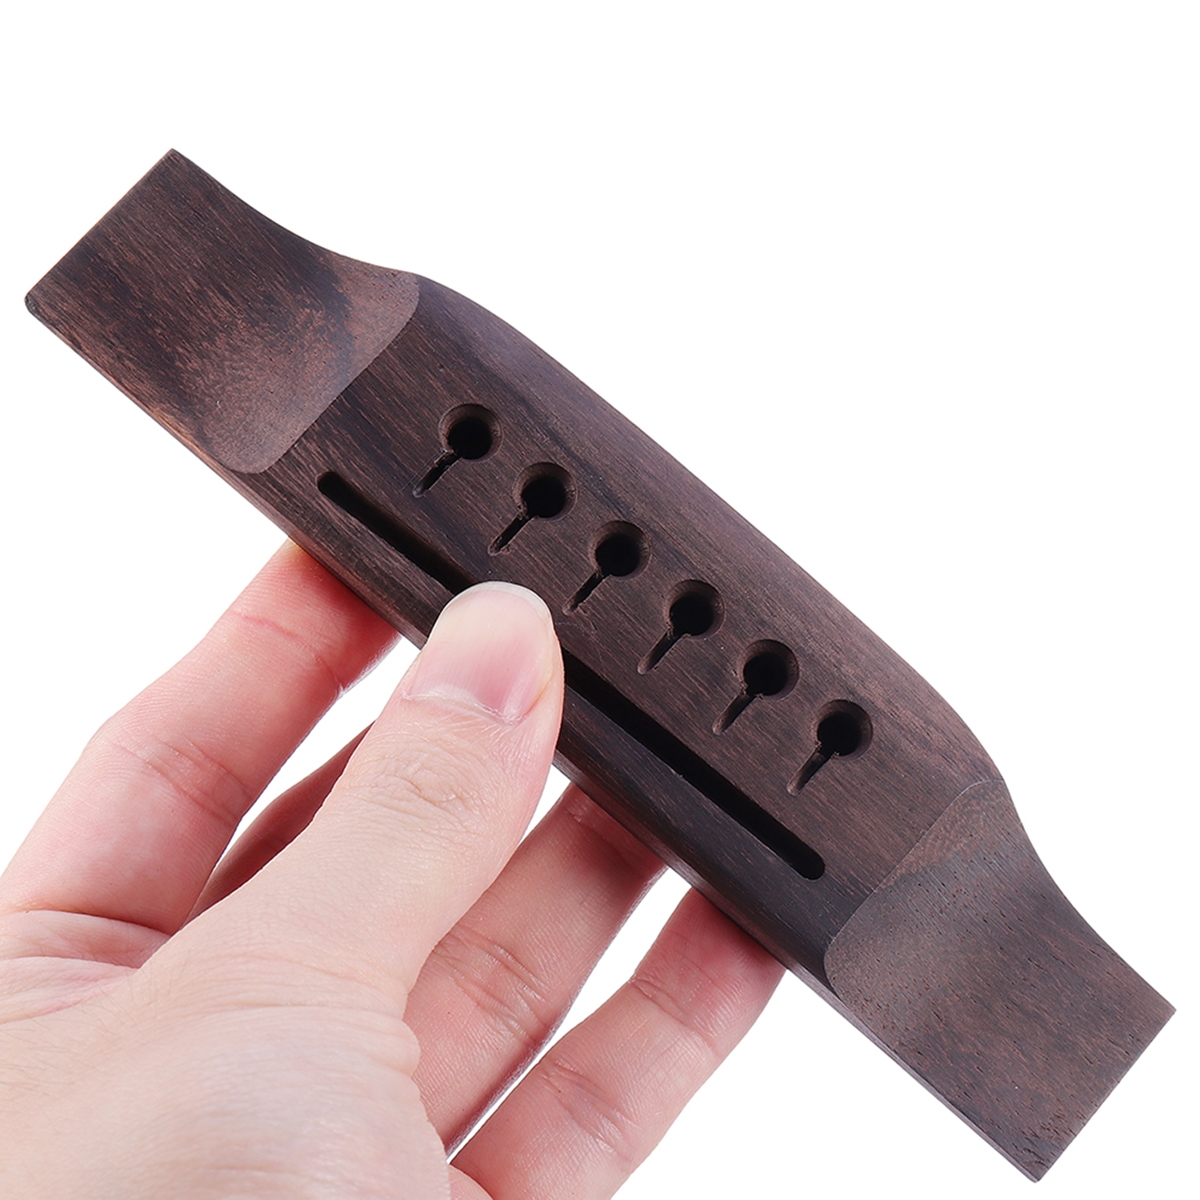 Rosewood Guitar Bridge Parts 6 String Acoustic Musical Instrument Accessory